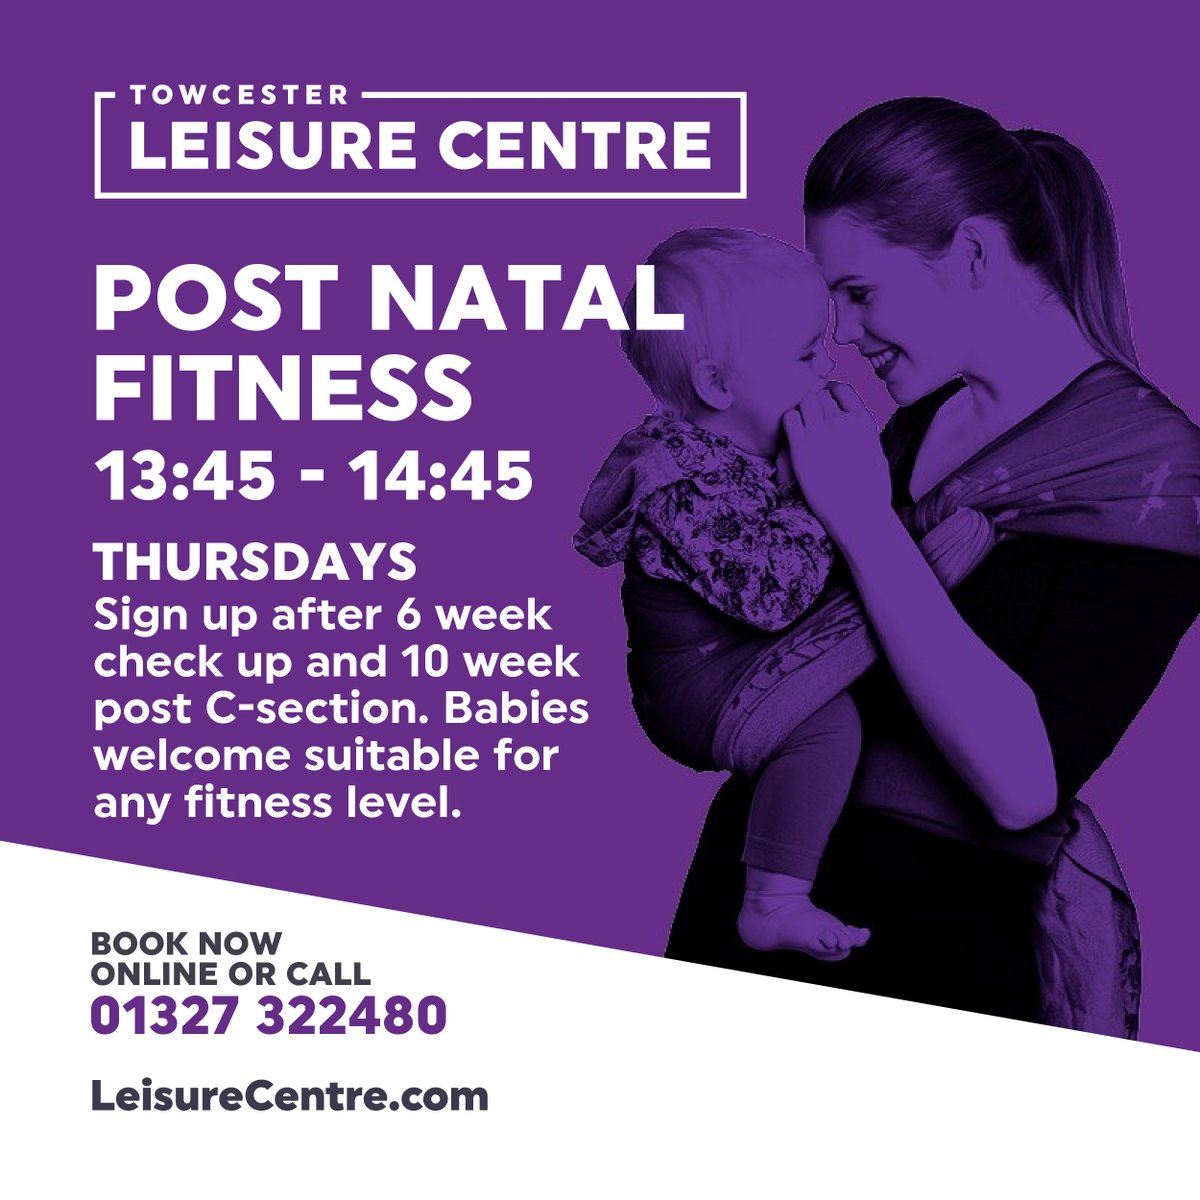 ***Post Natal Fitness*** Contact us today for further details and book your space on 01327 322480. #postnatalfitness #mumandbaby #fitness #yourlocal #leisurecentre